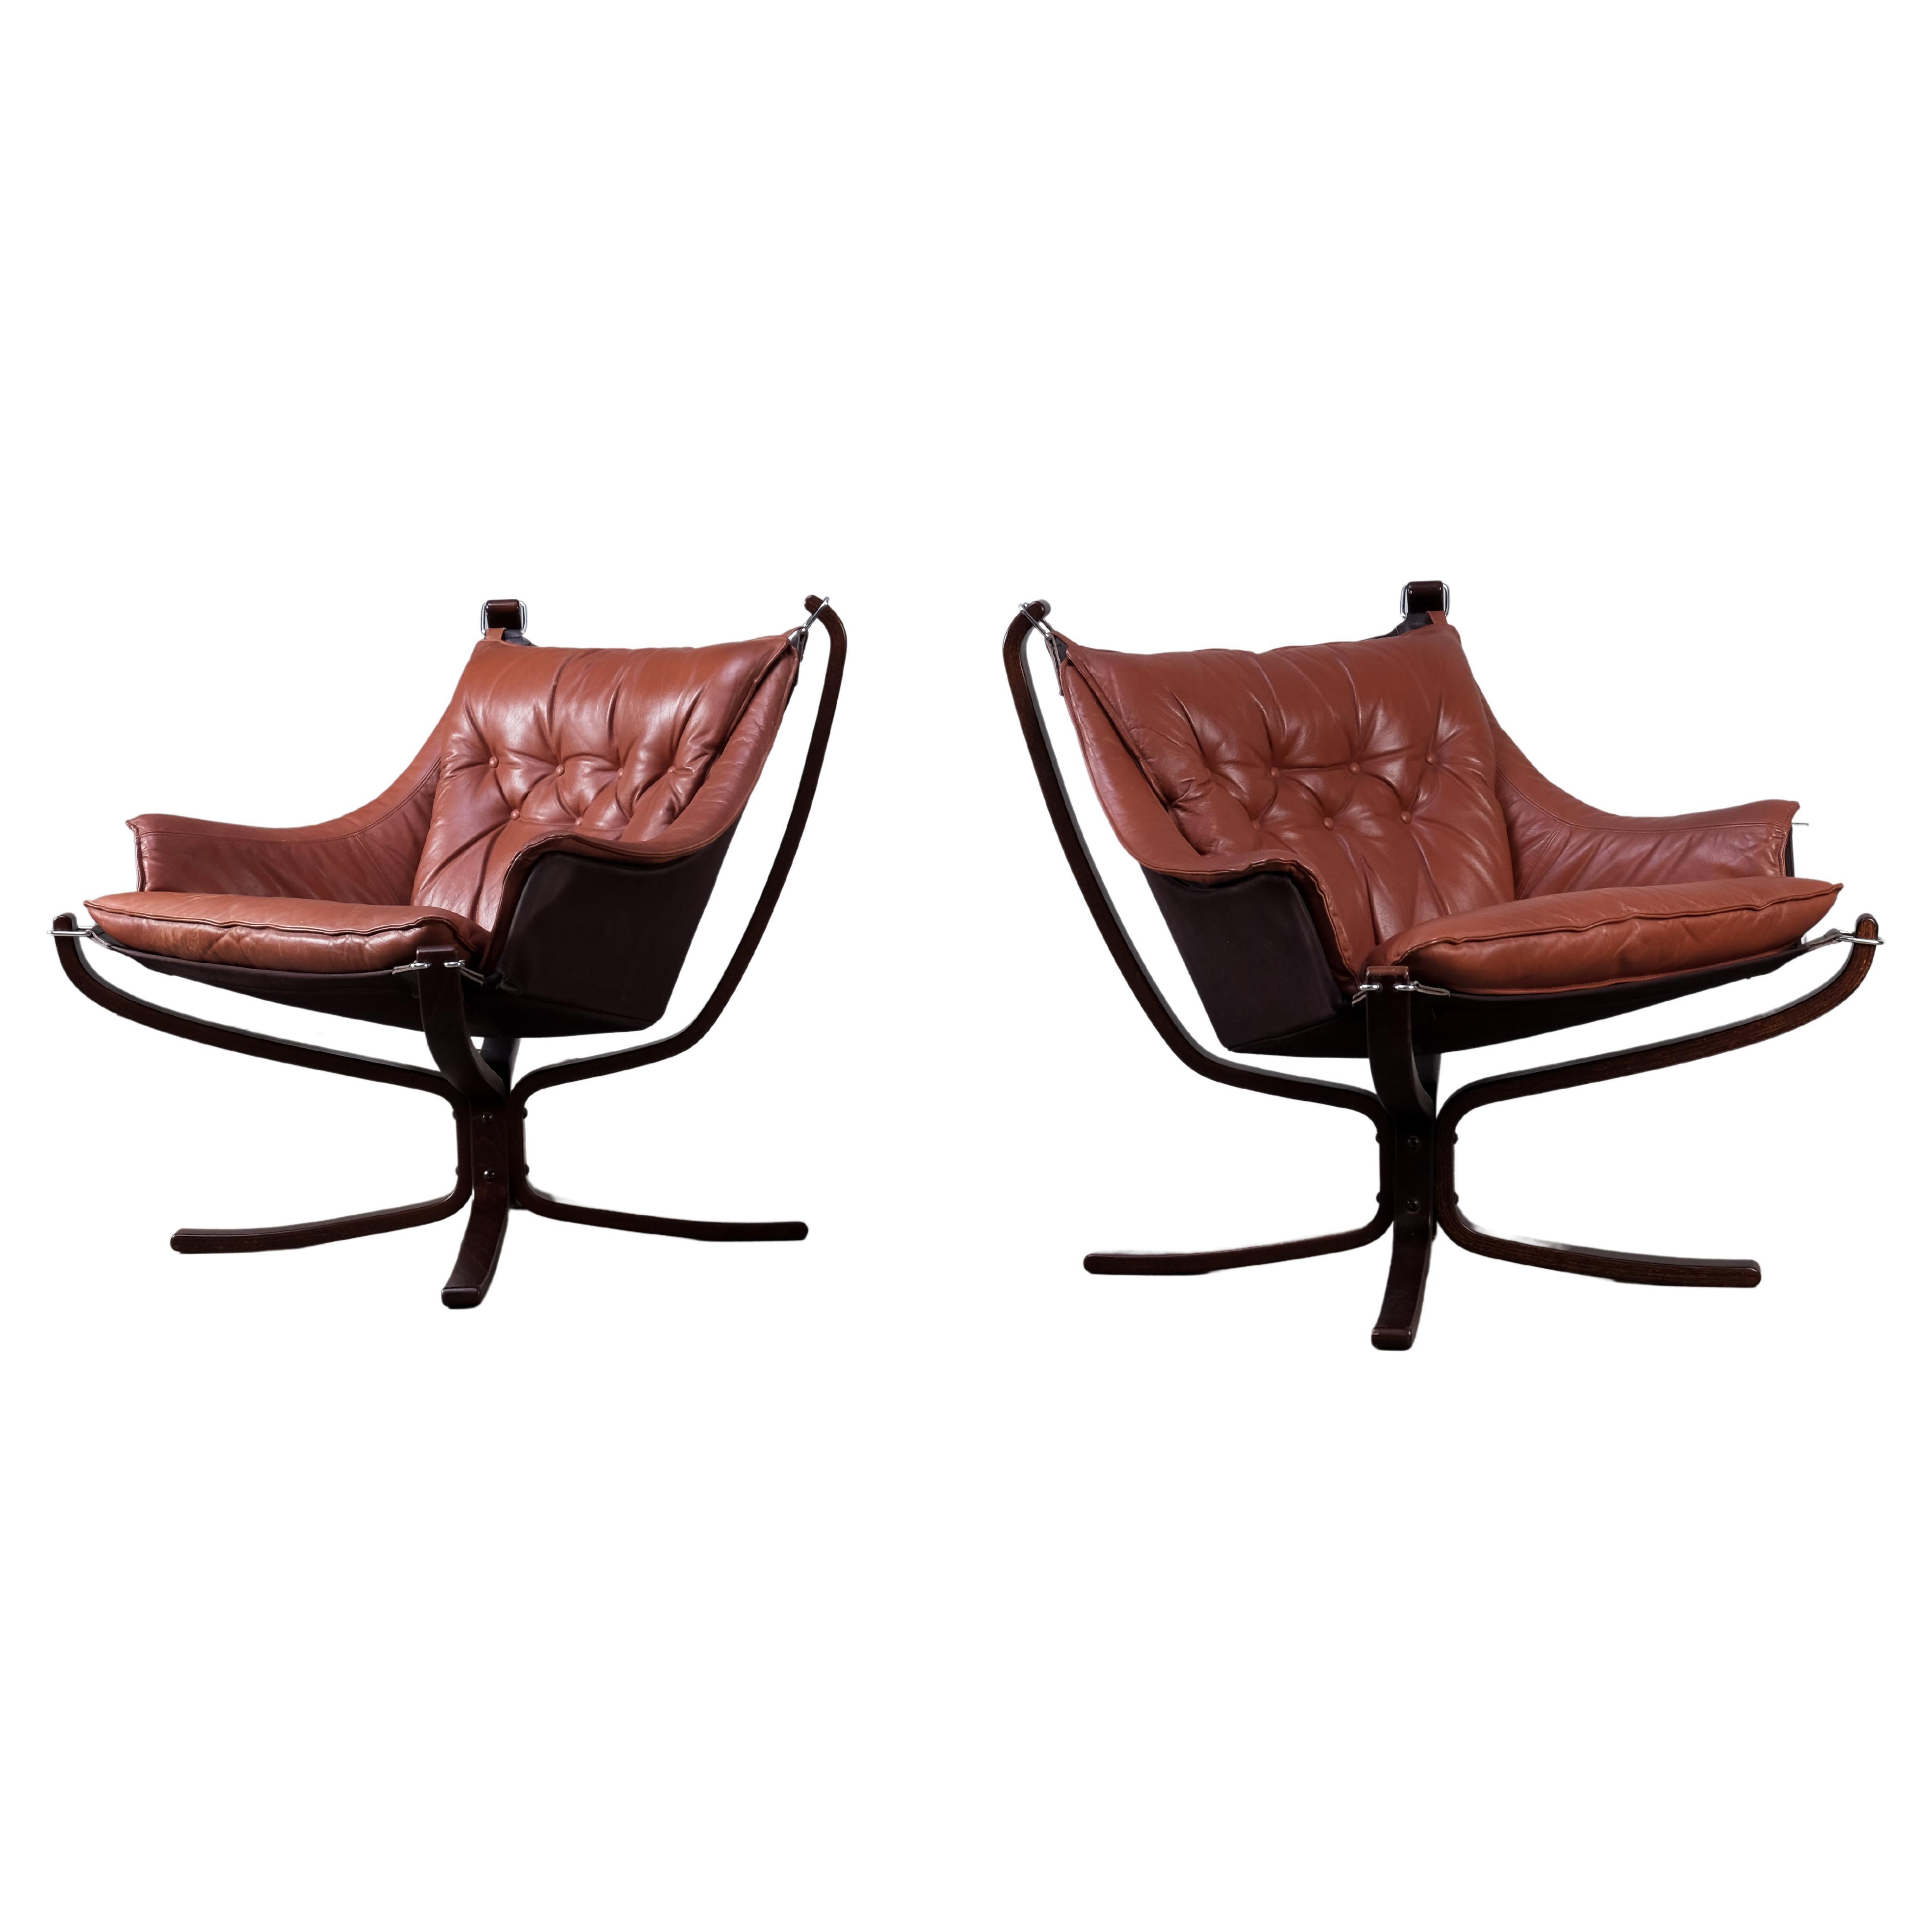 Pair of "Falcon" Chairs by Sigurd Ressell, 1970s